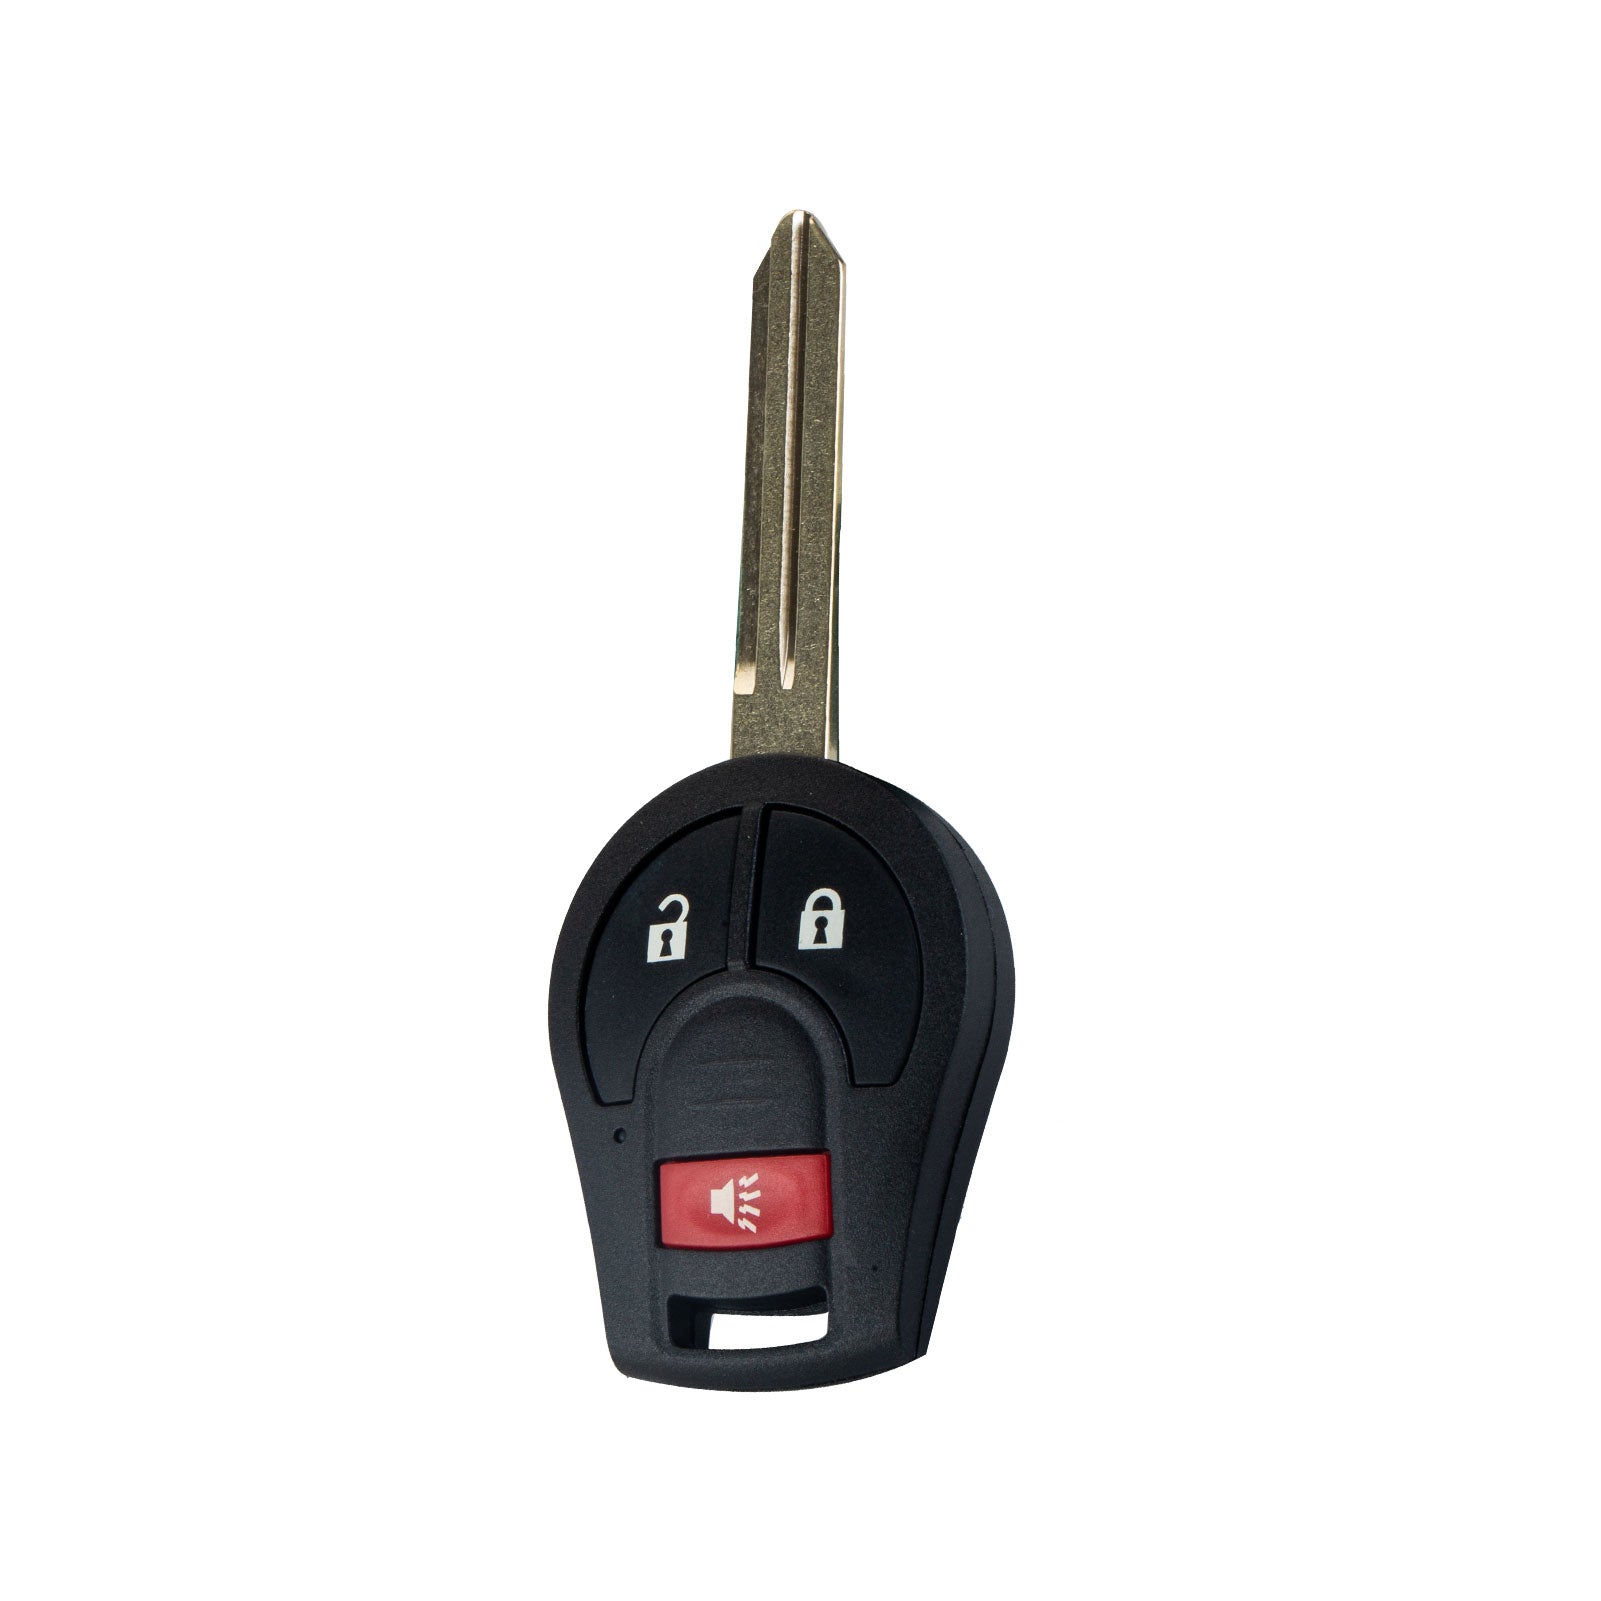 Keyless Entry Remote Replacement for Car Key Fob for 2005-2015 Armada 2009-2014 Cube 2003-2008 FX45 3 Button 46 Chip CWTWB1U751  KR-N3SA